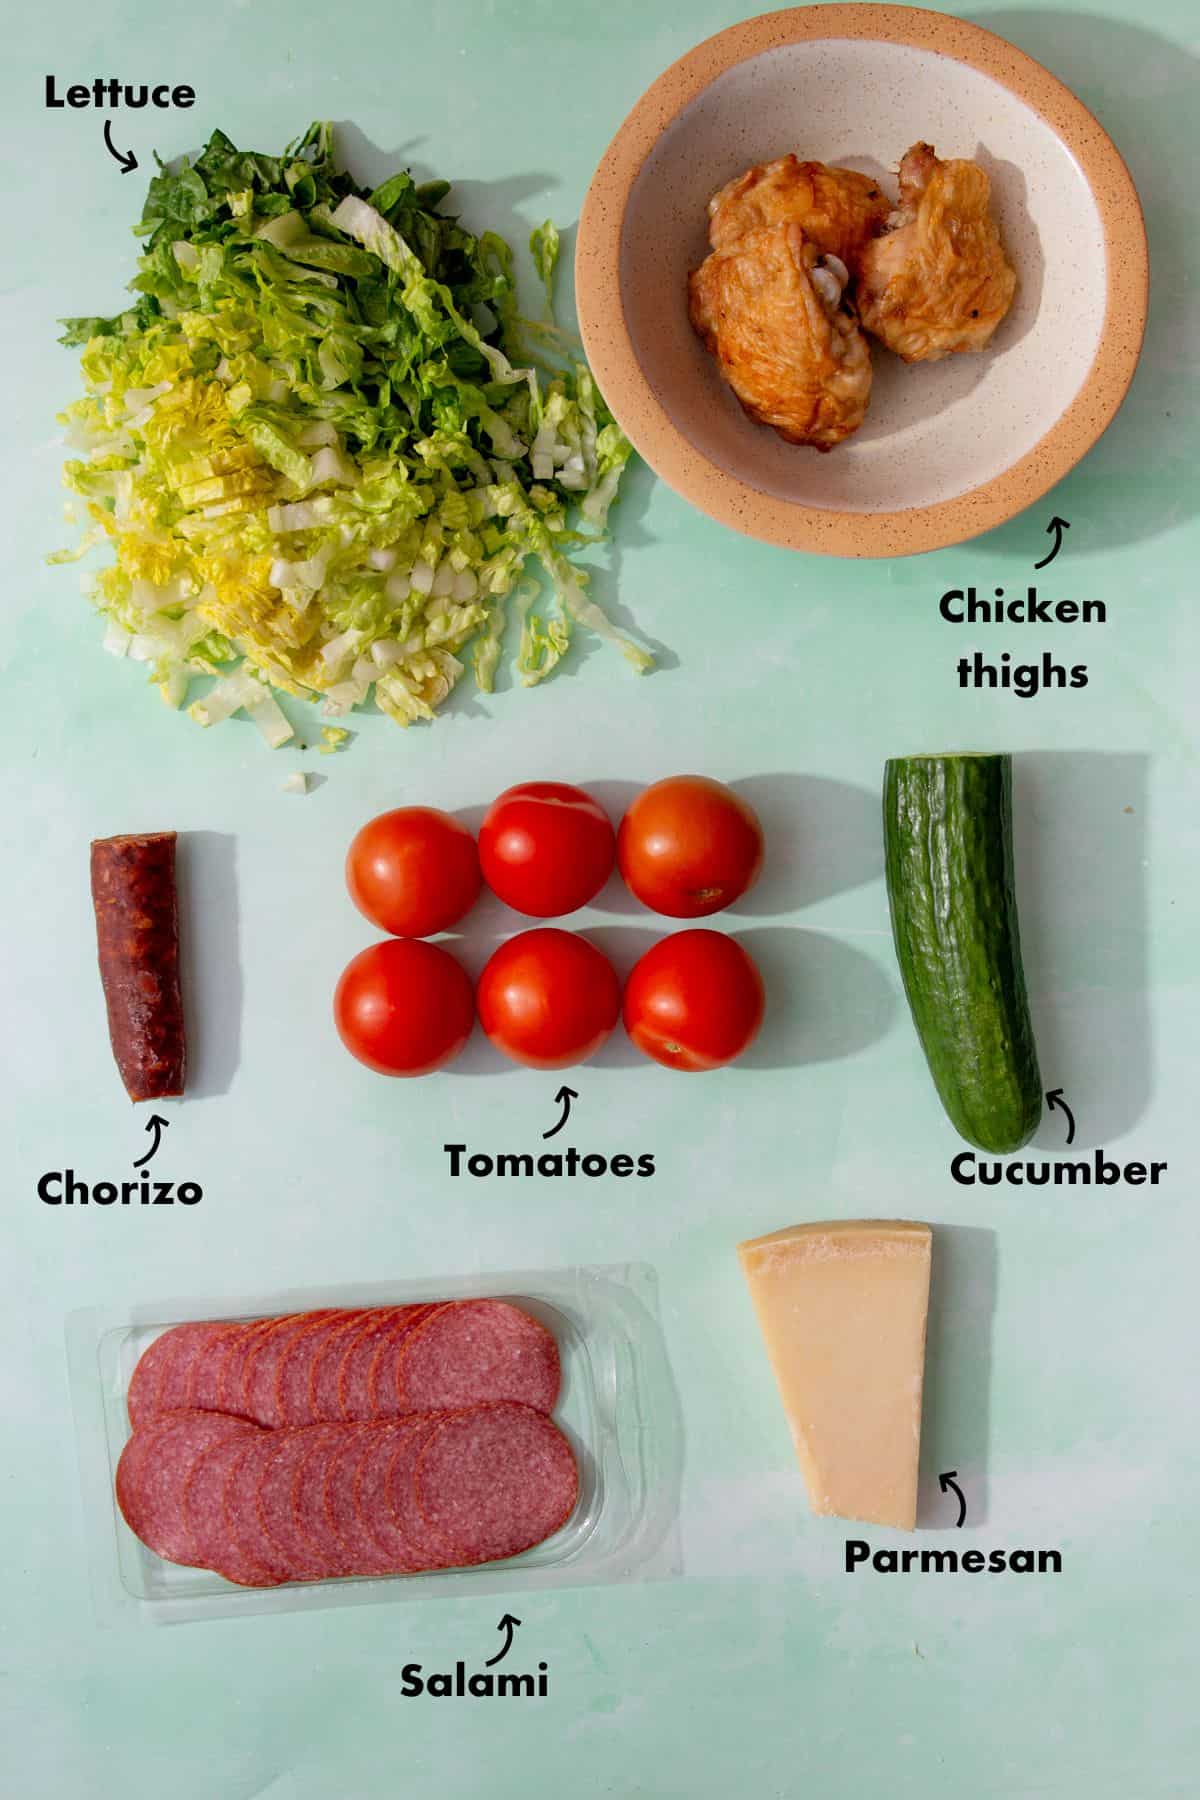 Ingredients to make a salad laid out on a pale blue background and labelled.